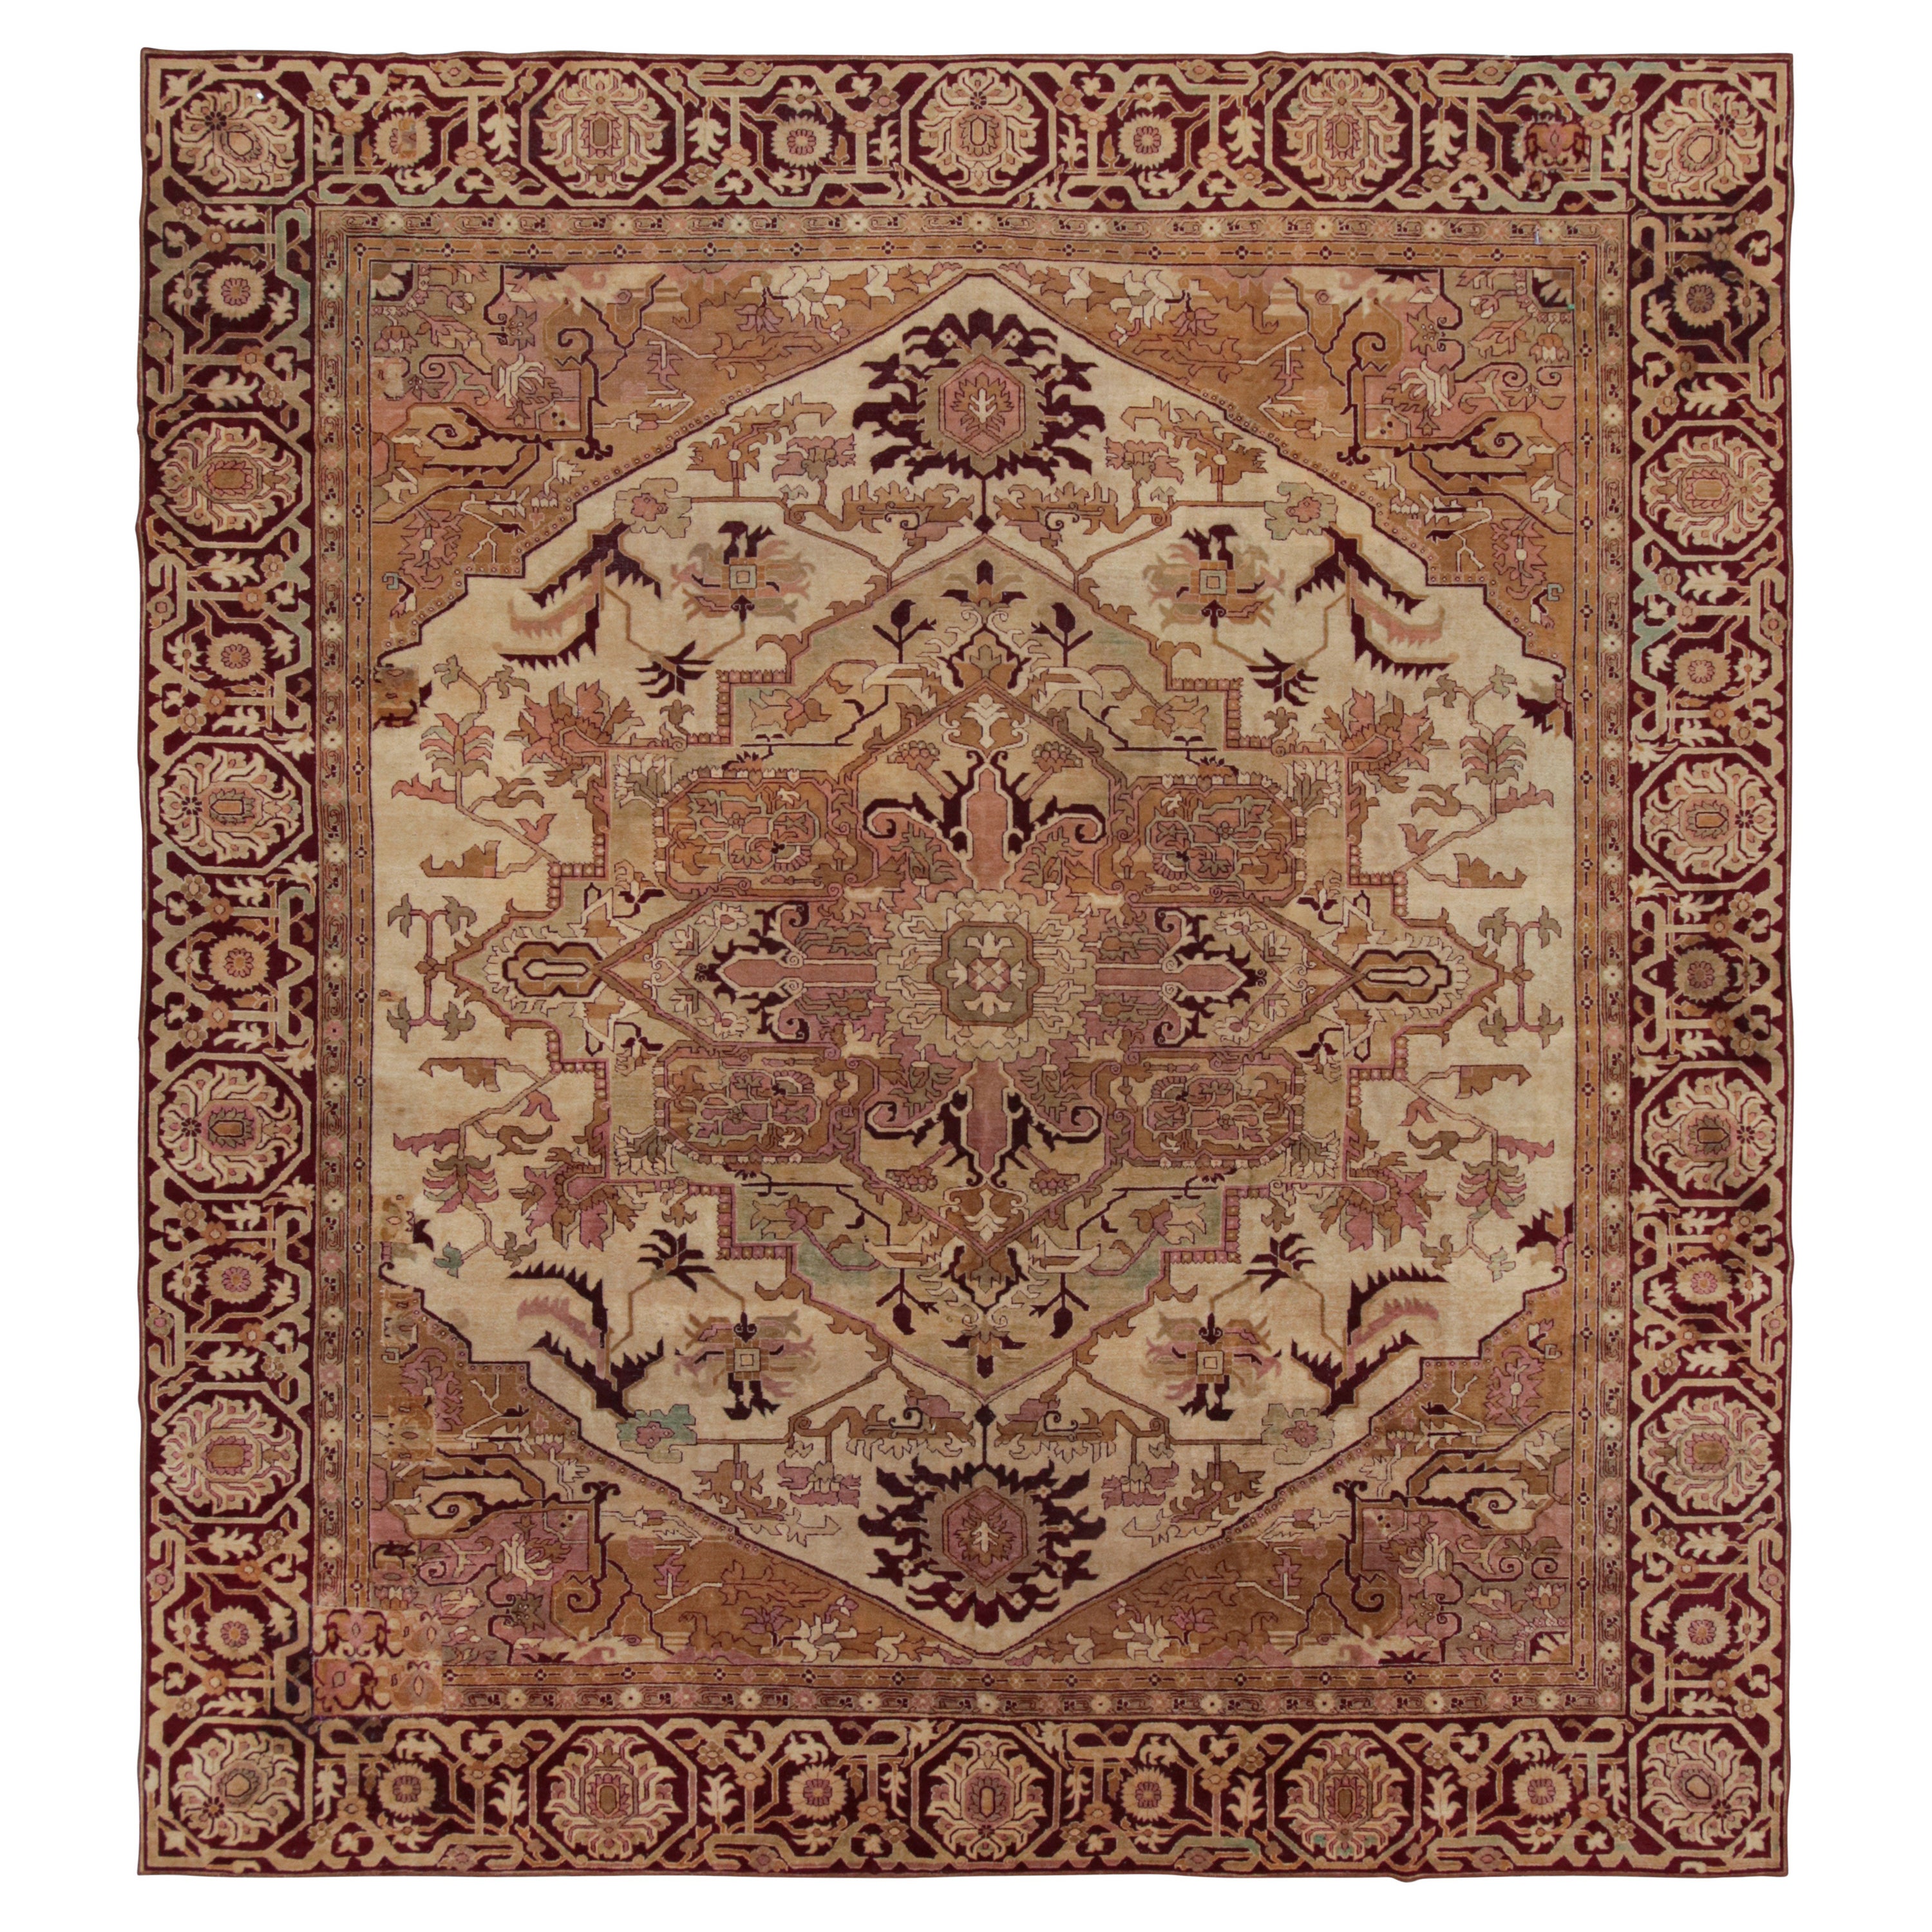 Antique Amritsar Rug in Beige with Green and Pink Medallion, from Rug & Kilim For Sale